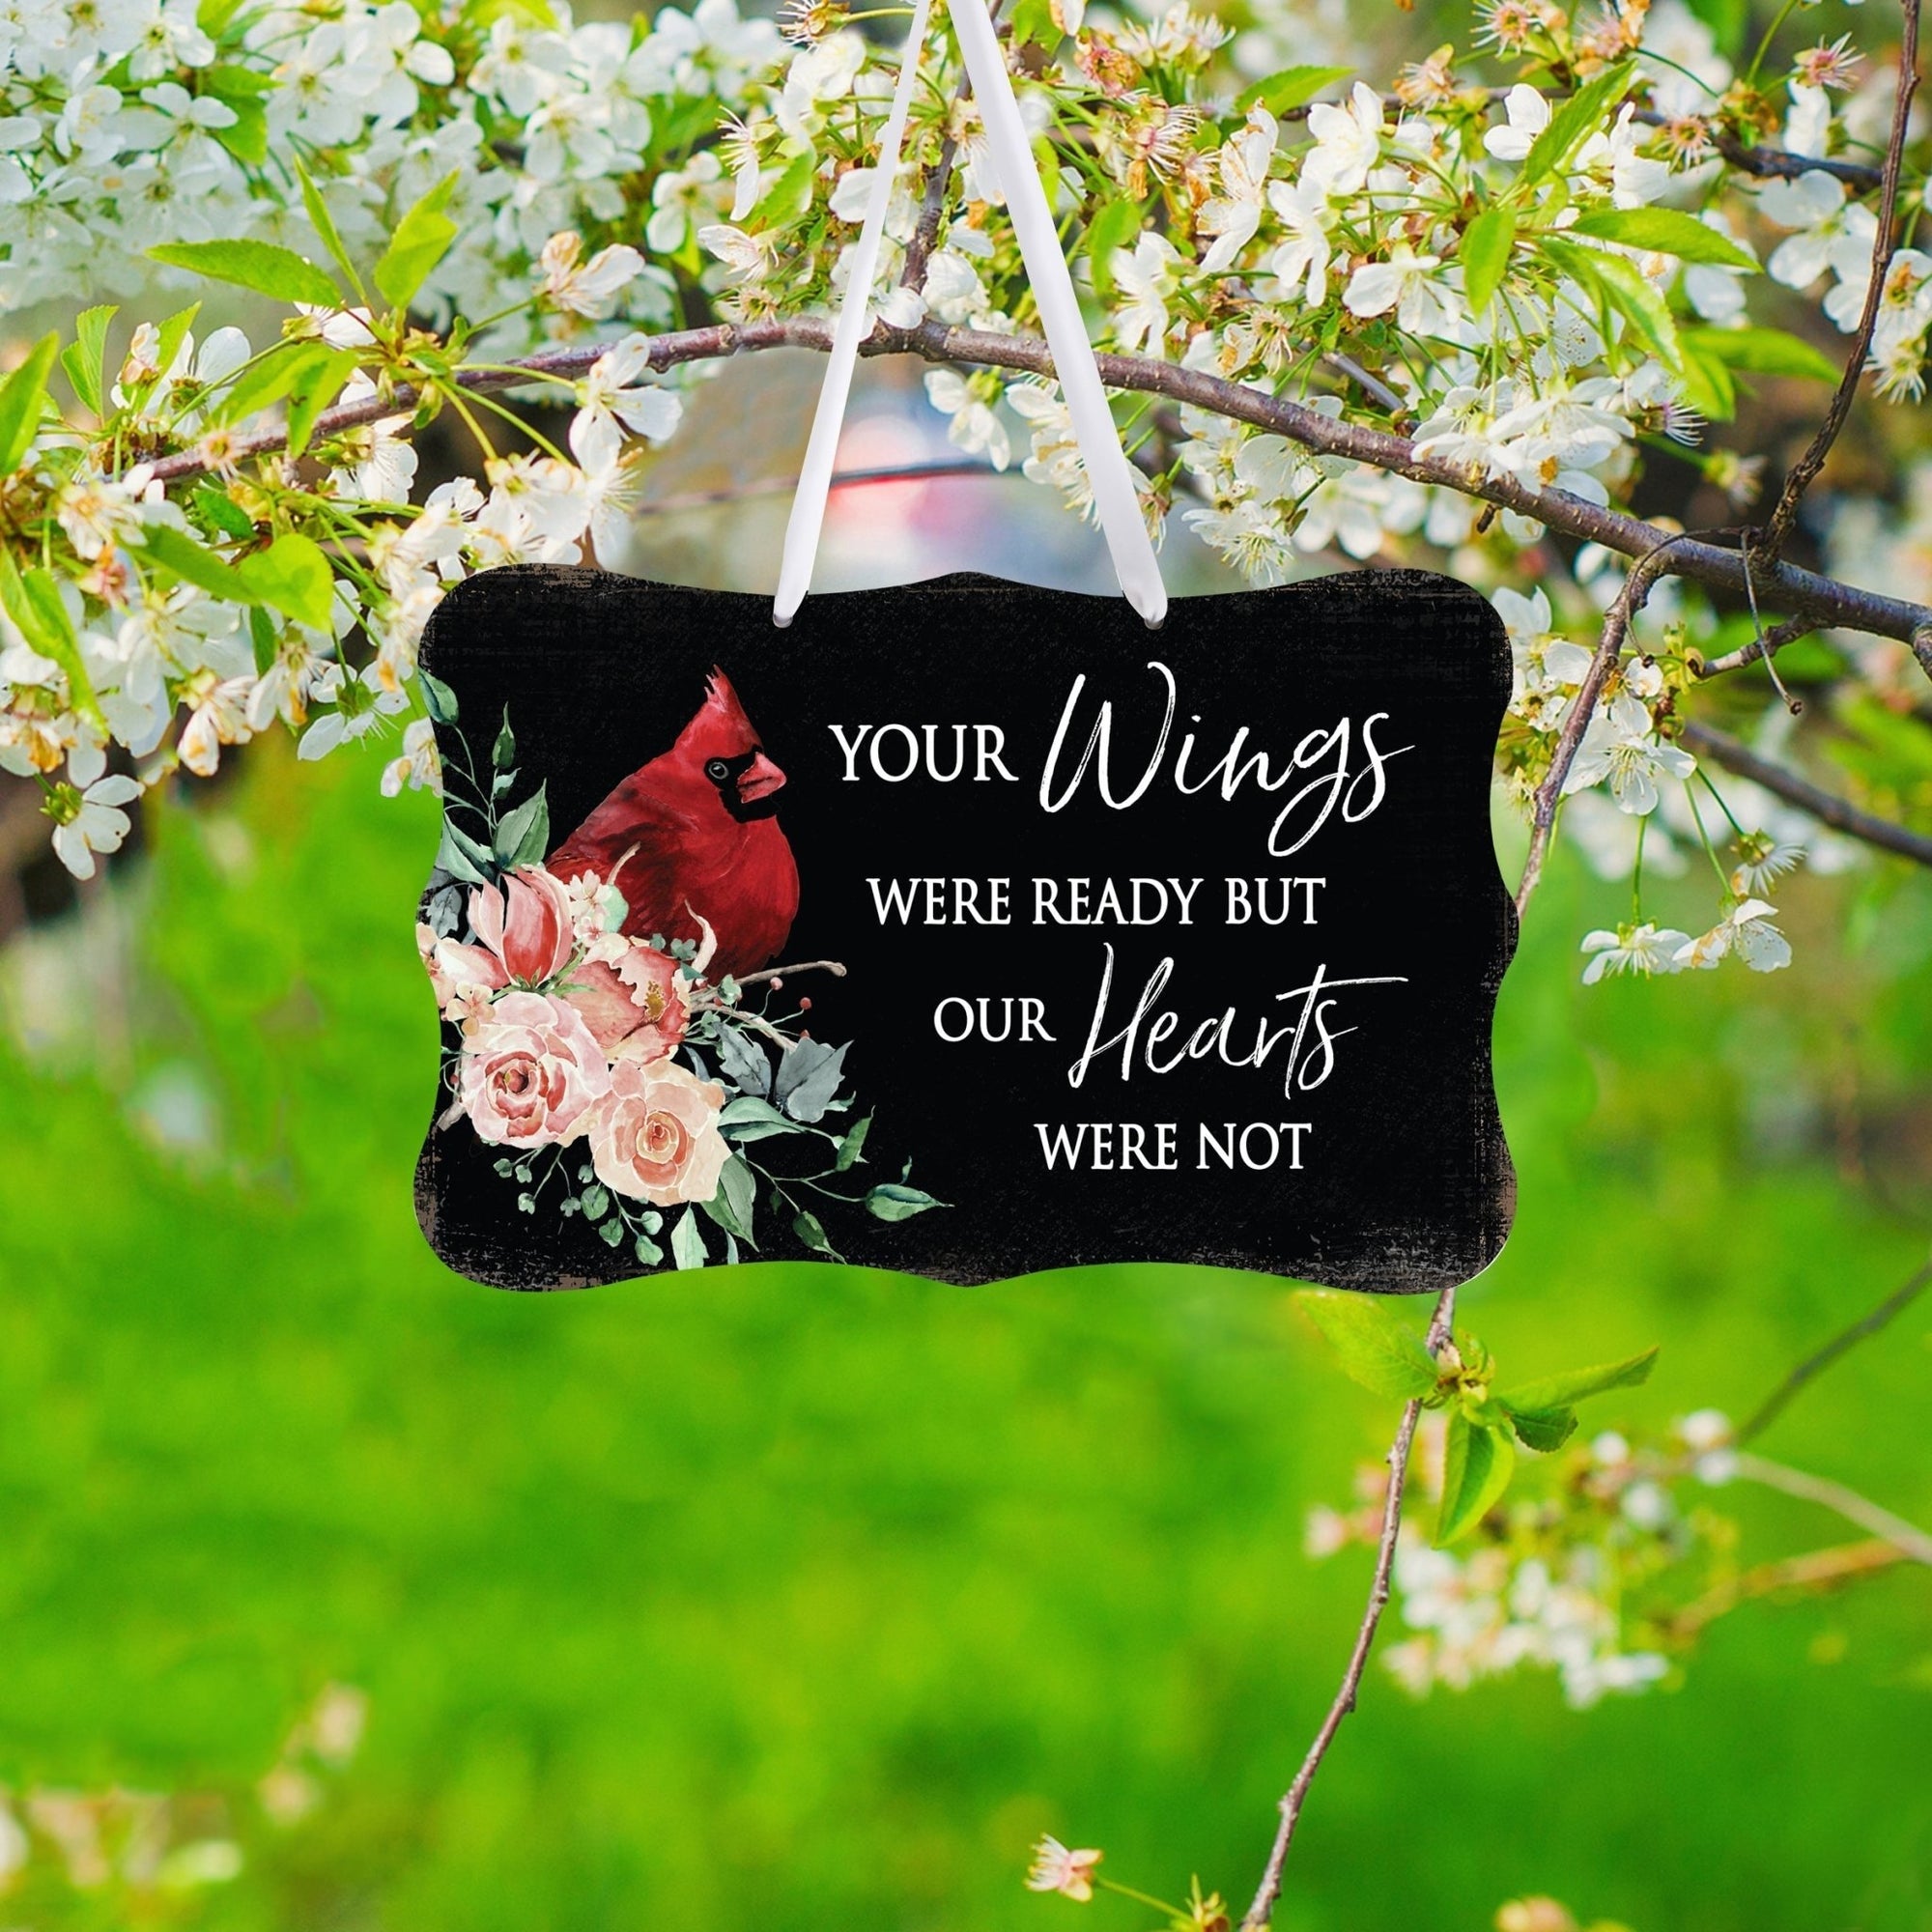 A memorial wall hanging sign adorned with a cardinal ribbon, a symbol of remembrance.